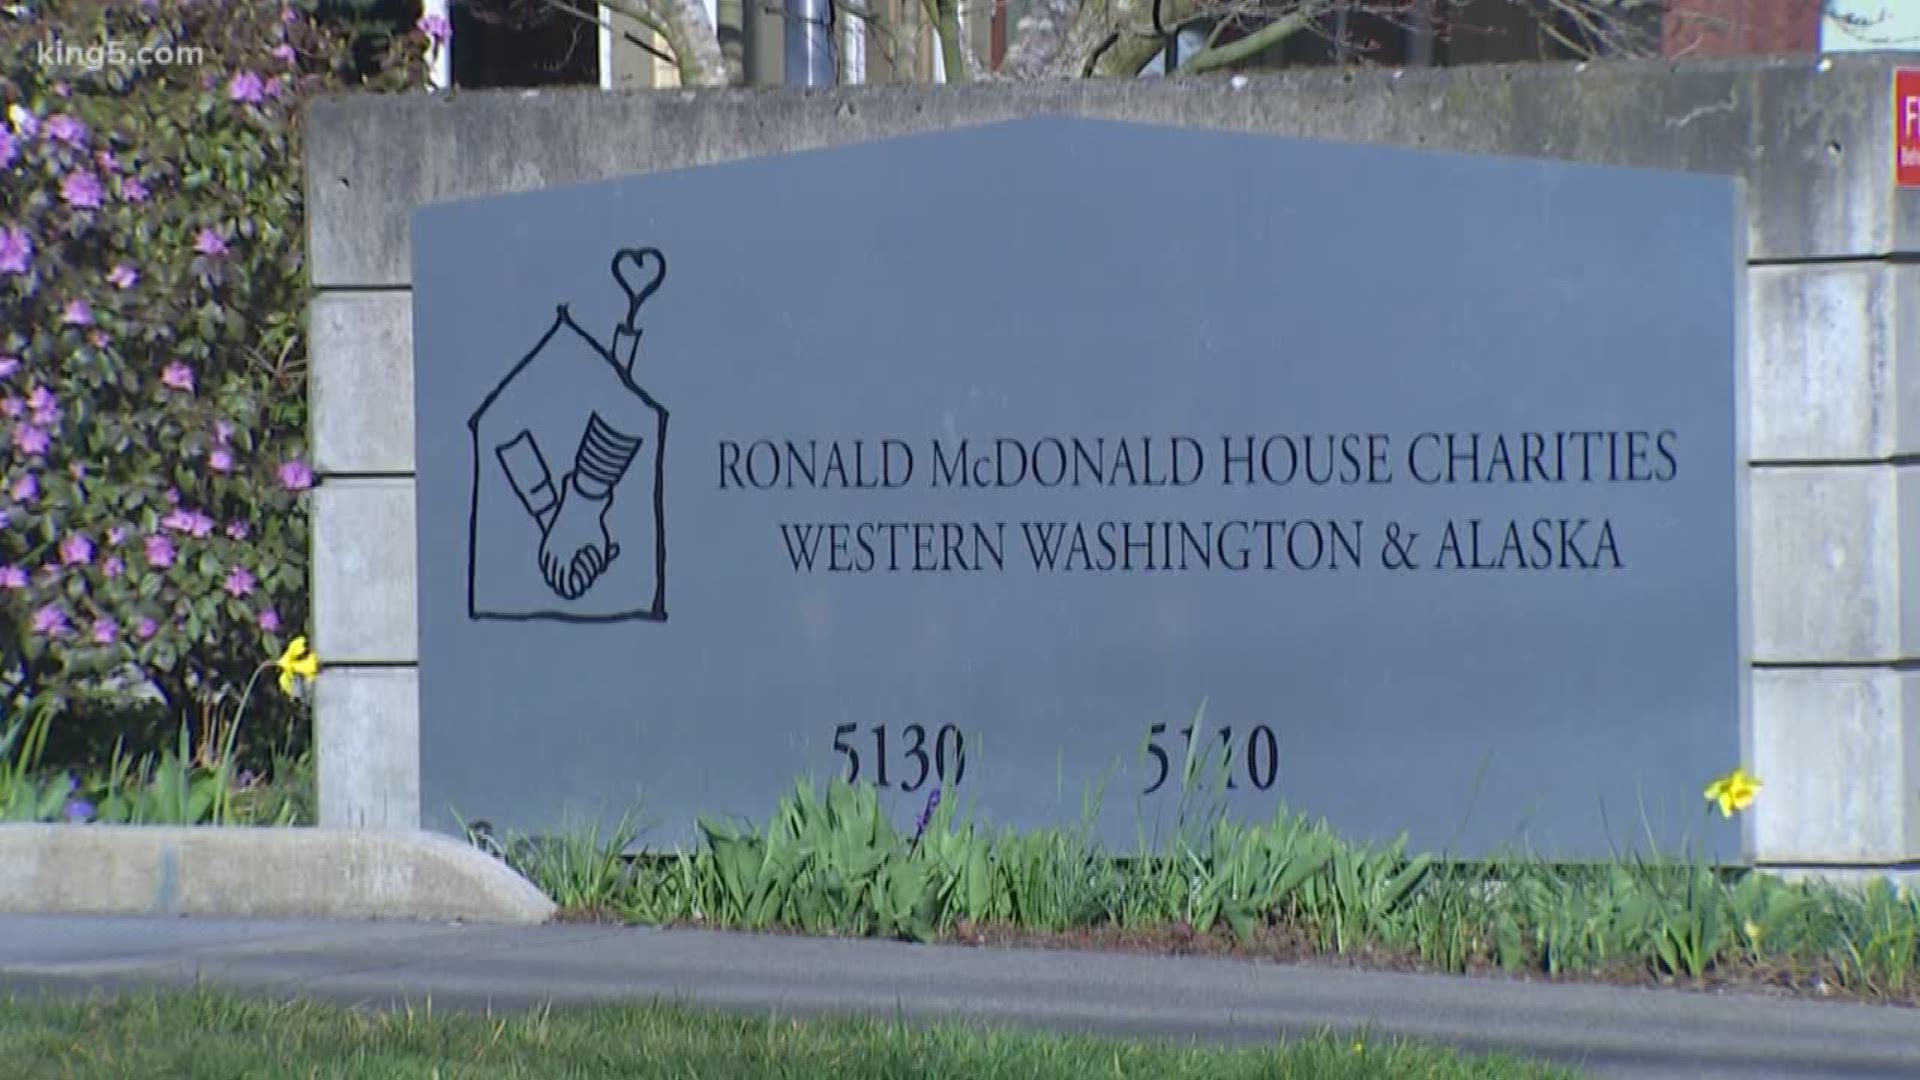 The Ronald McDonald House gives families from out of town a place to stay near Seattle Children’s Hospital while their kids receive treatment.